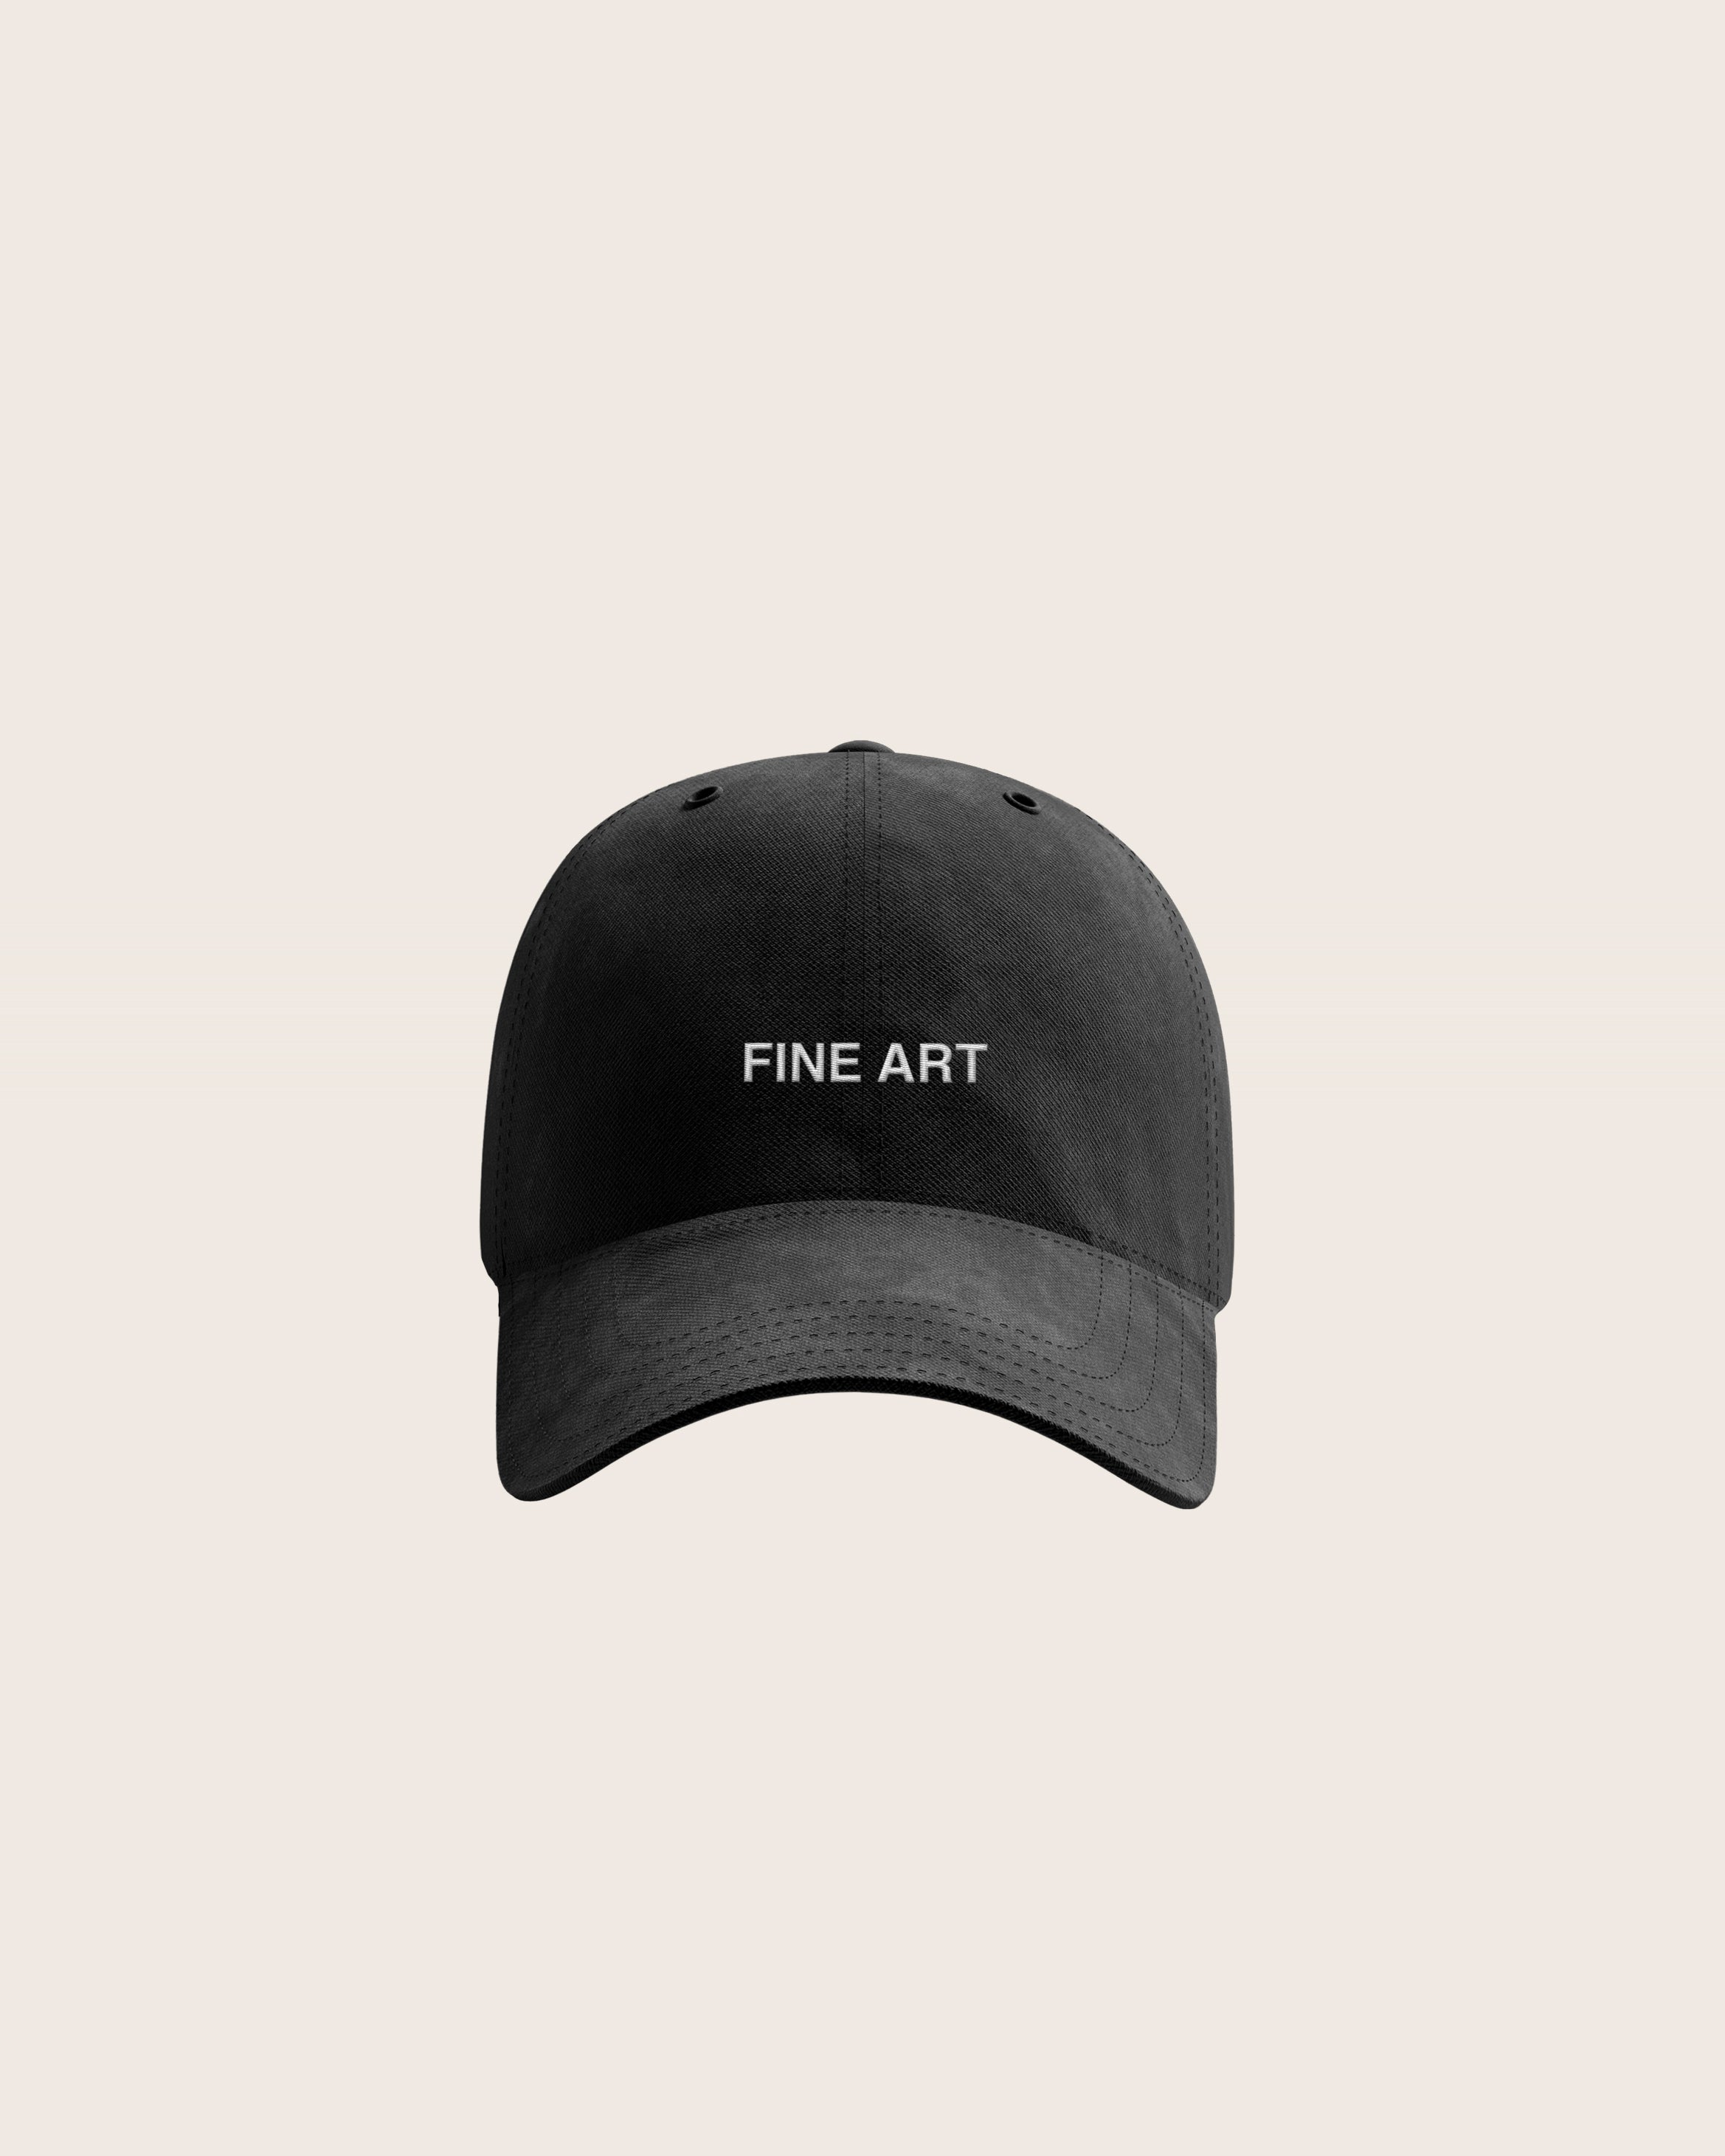 Black Baseball Cap / Dad Hat with Fine Art Movement Text Embroidery on Front. 100% Cotton.